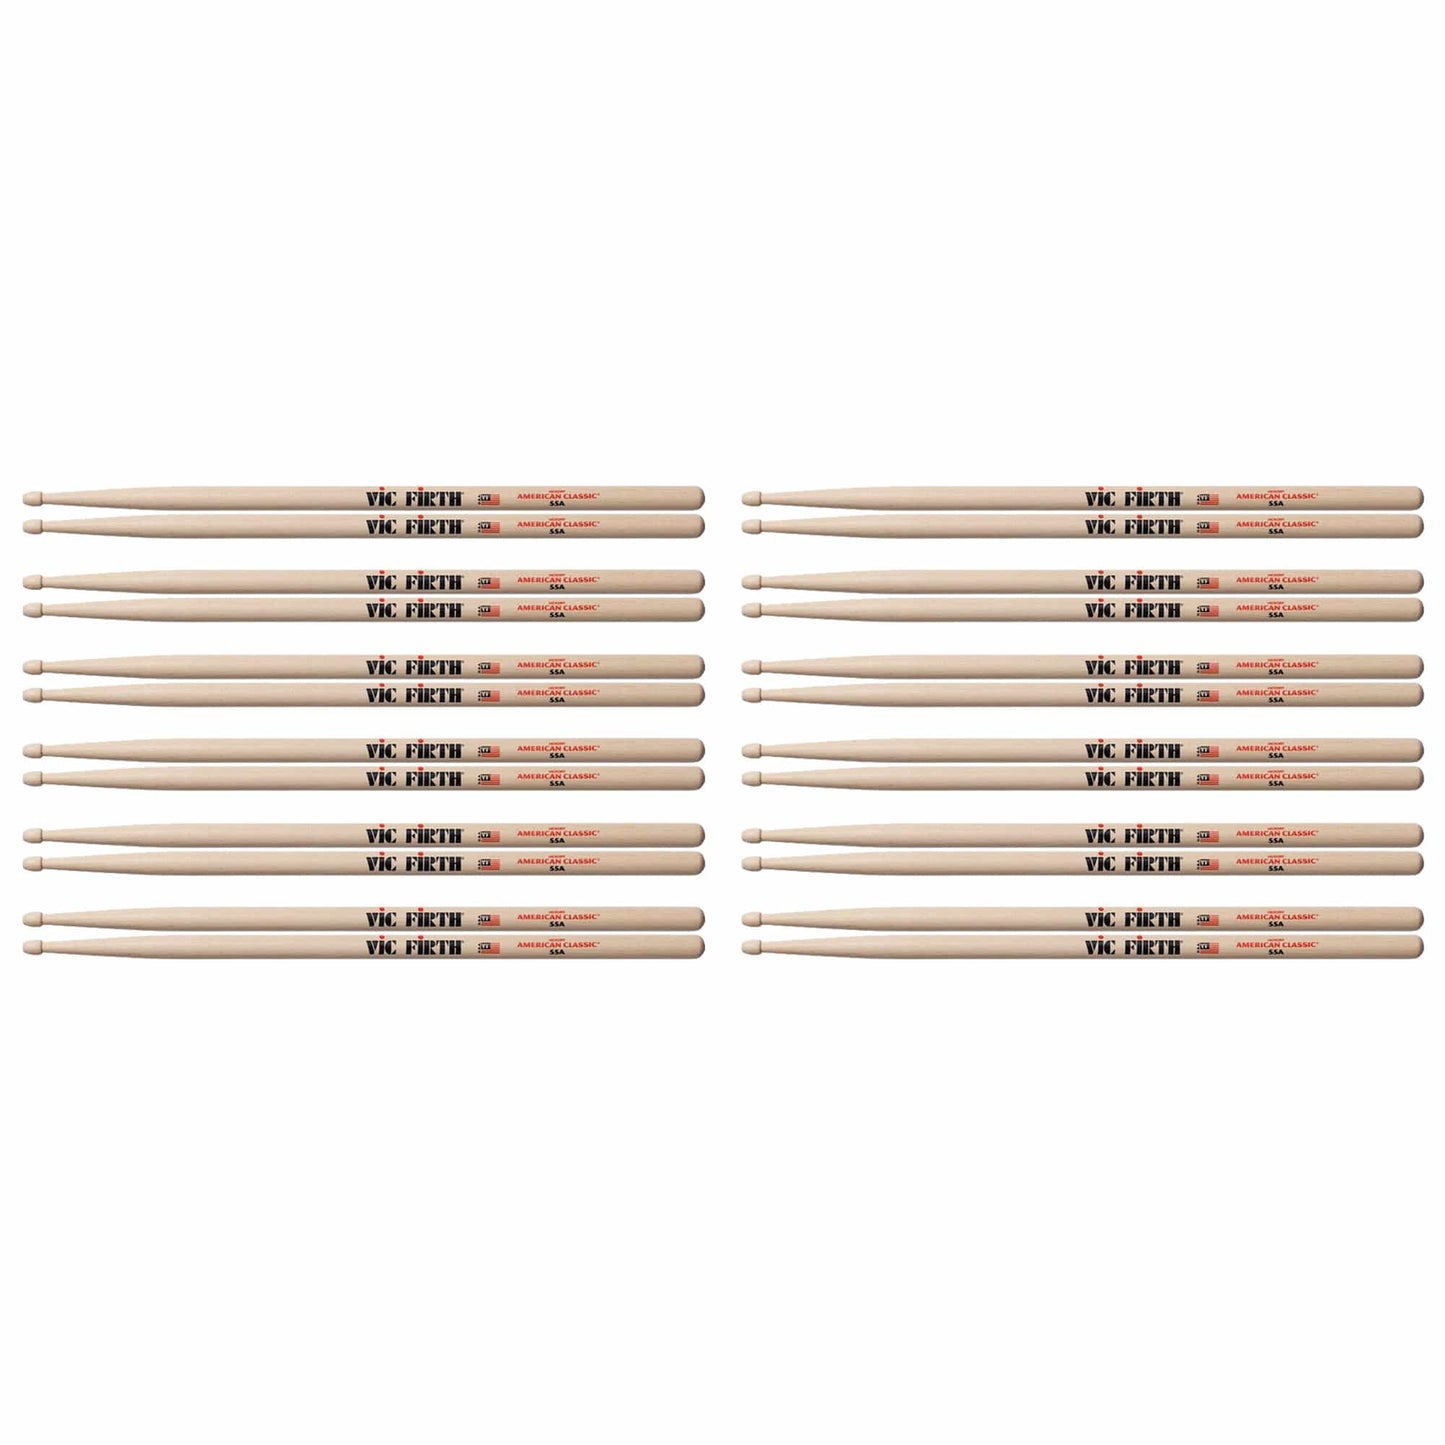 Vic Firth 55A Wood Tip Drum Sticks (12 Pair Bundle) Drums and Percussion / Parts and Accessories / Drum Sticks and Mallets